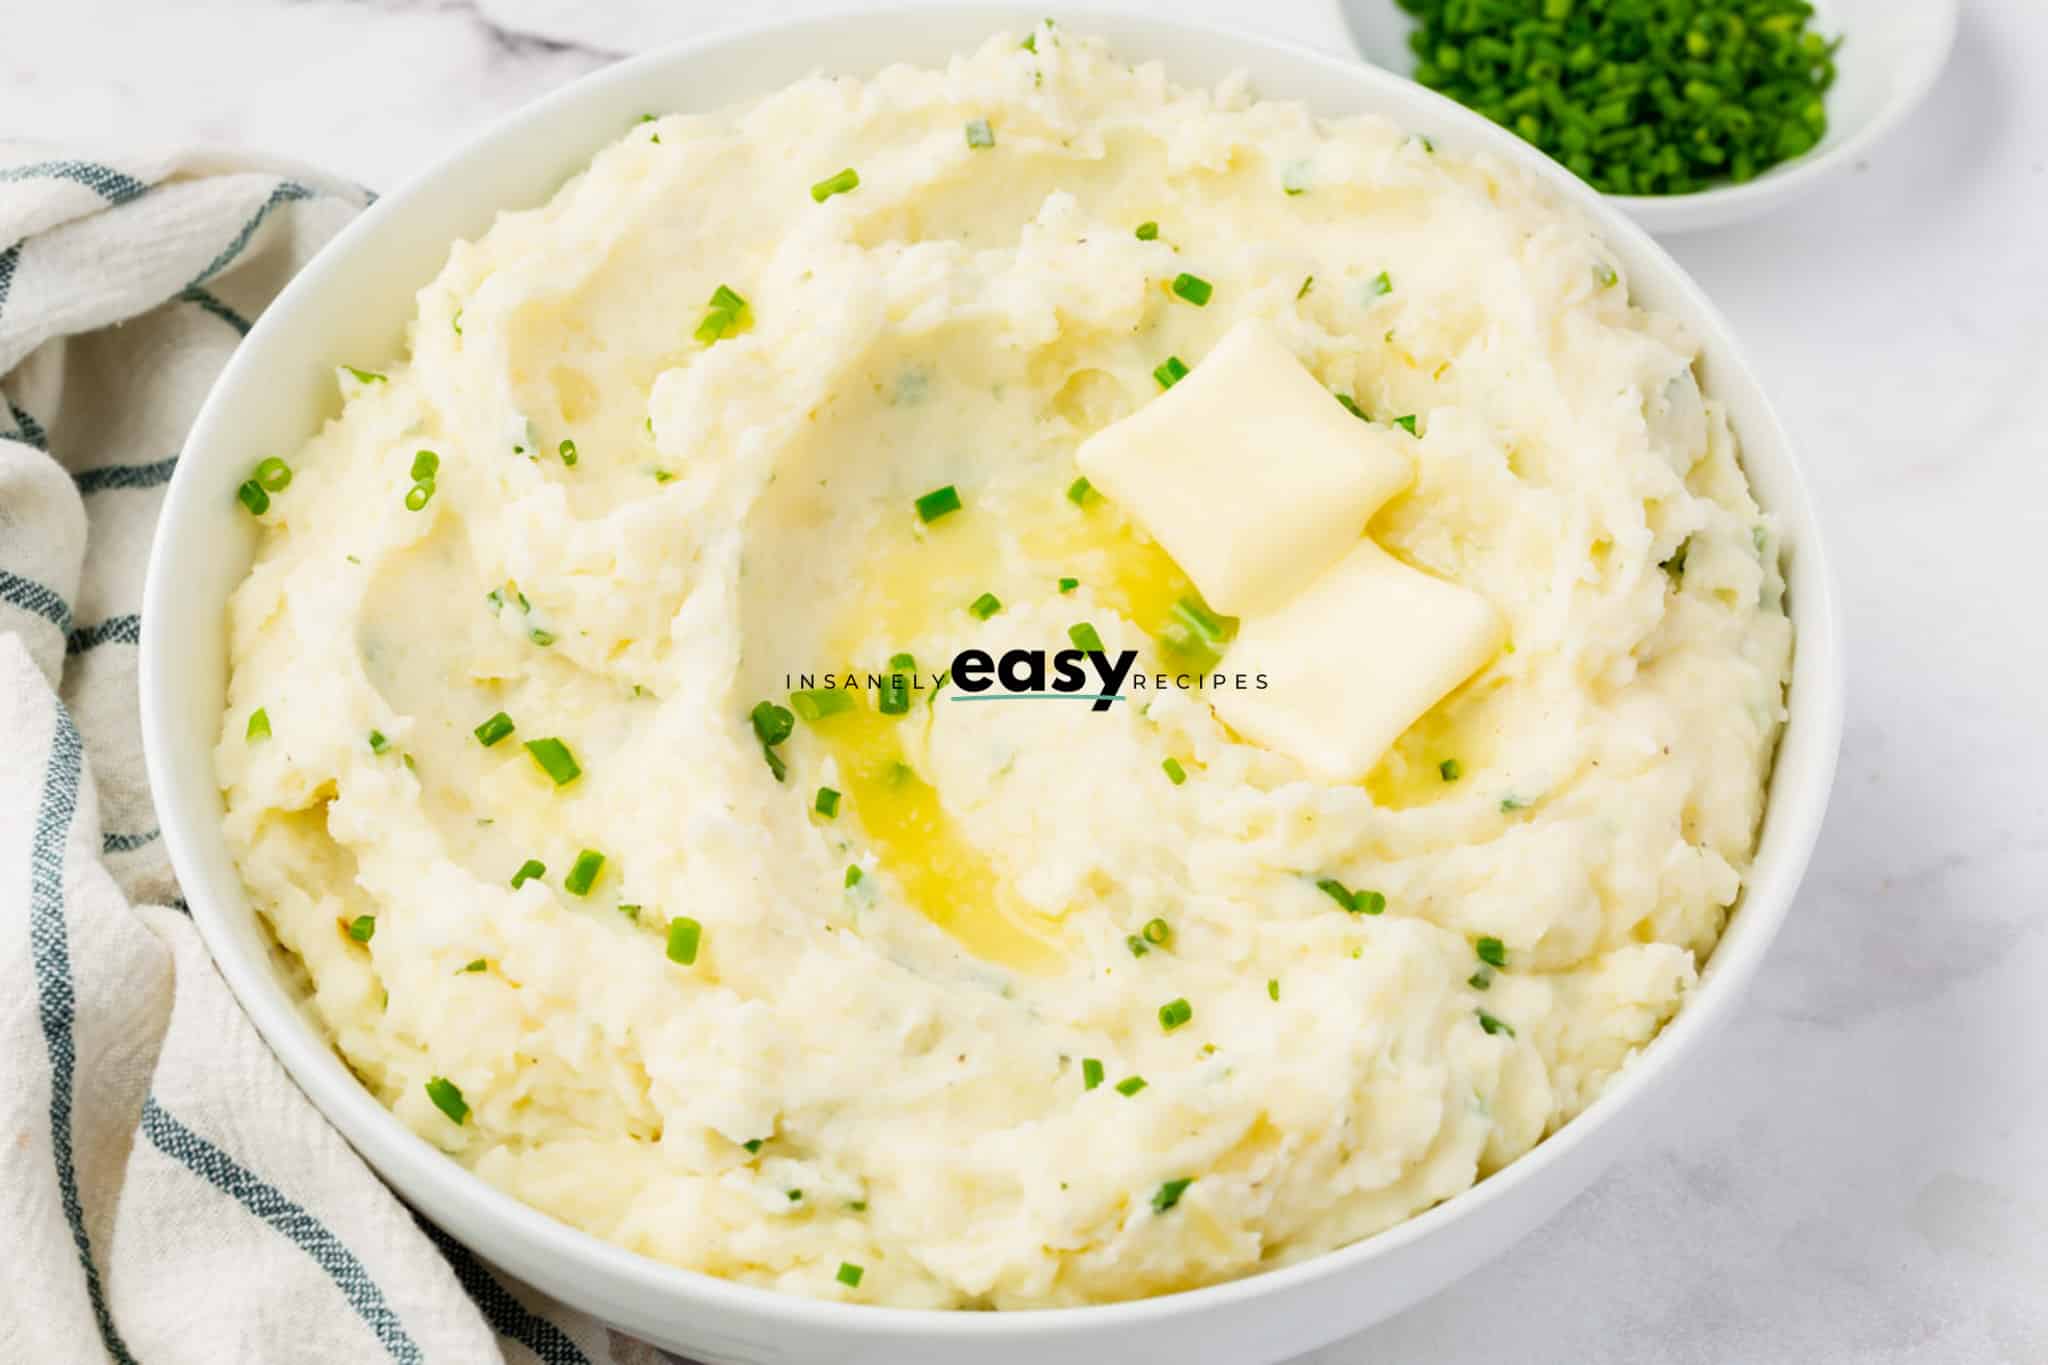 creamy ranch mashed potatoes in a white bowl. Potatoes have green seasoning on top and two butter pads